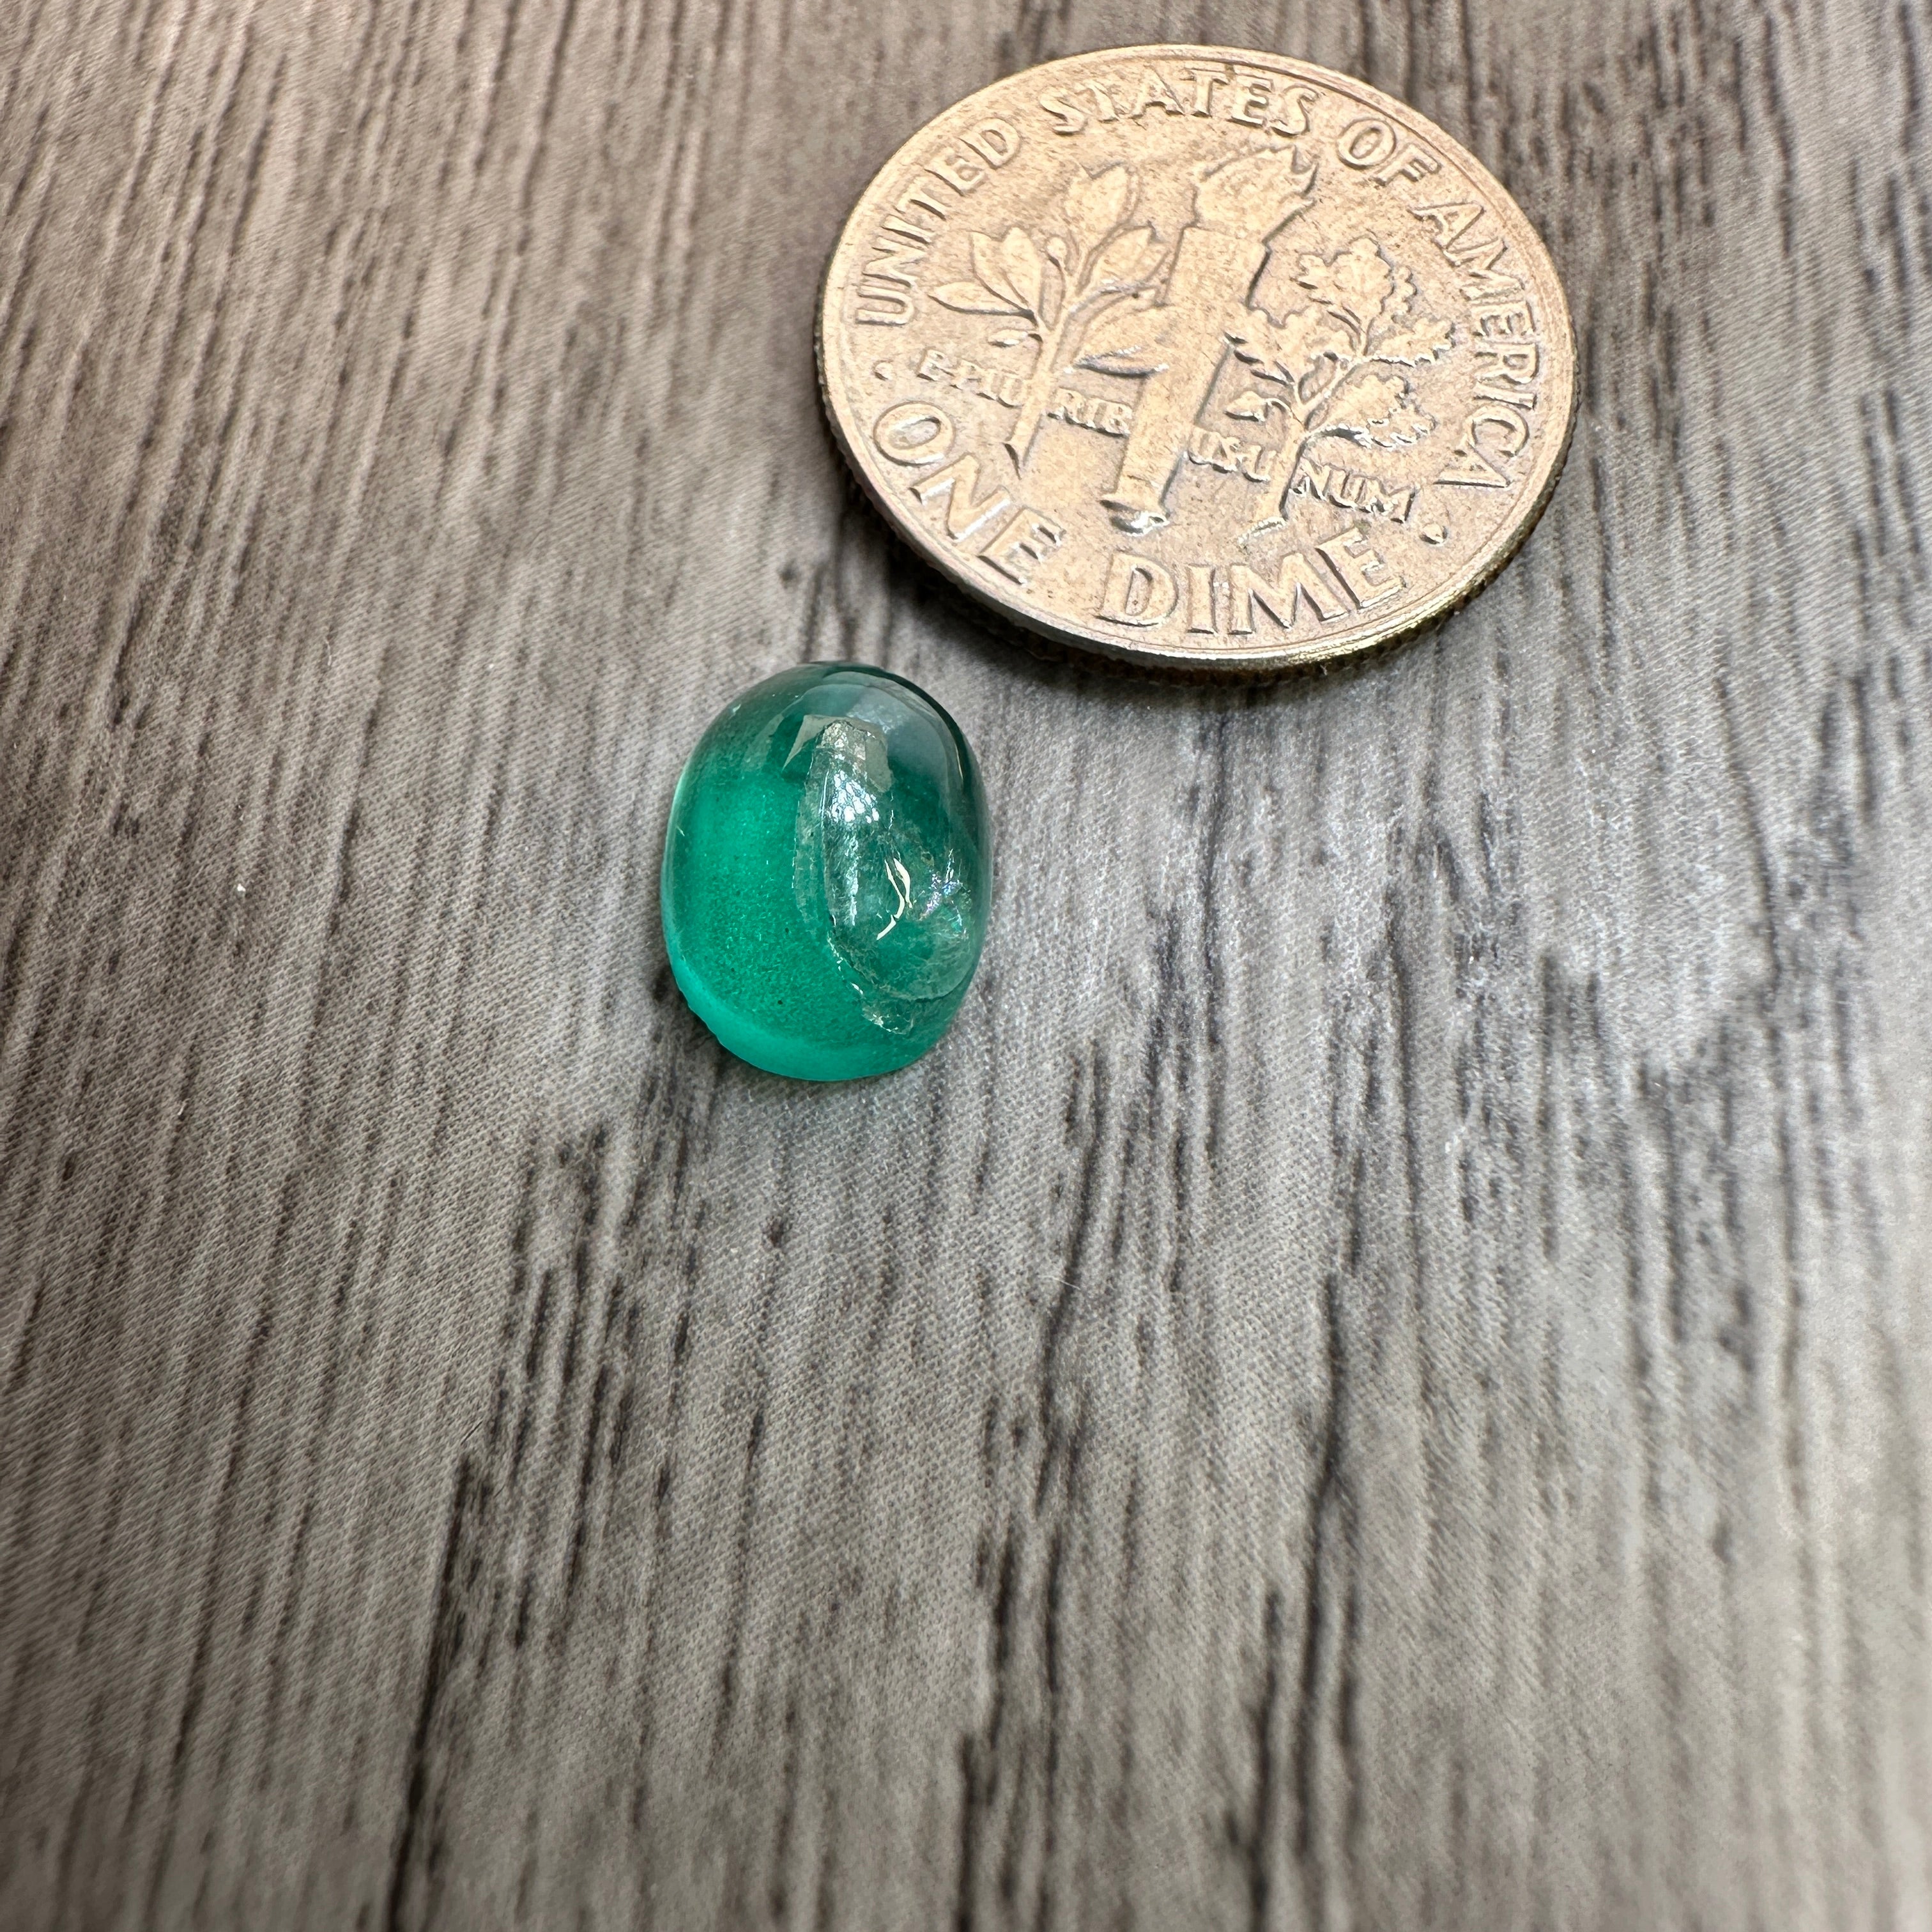 1.99ct Emerald, Tanzania, No Oil, Untreated Unheated. Internal fracture that would have normally been hidden with oil